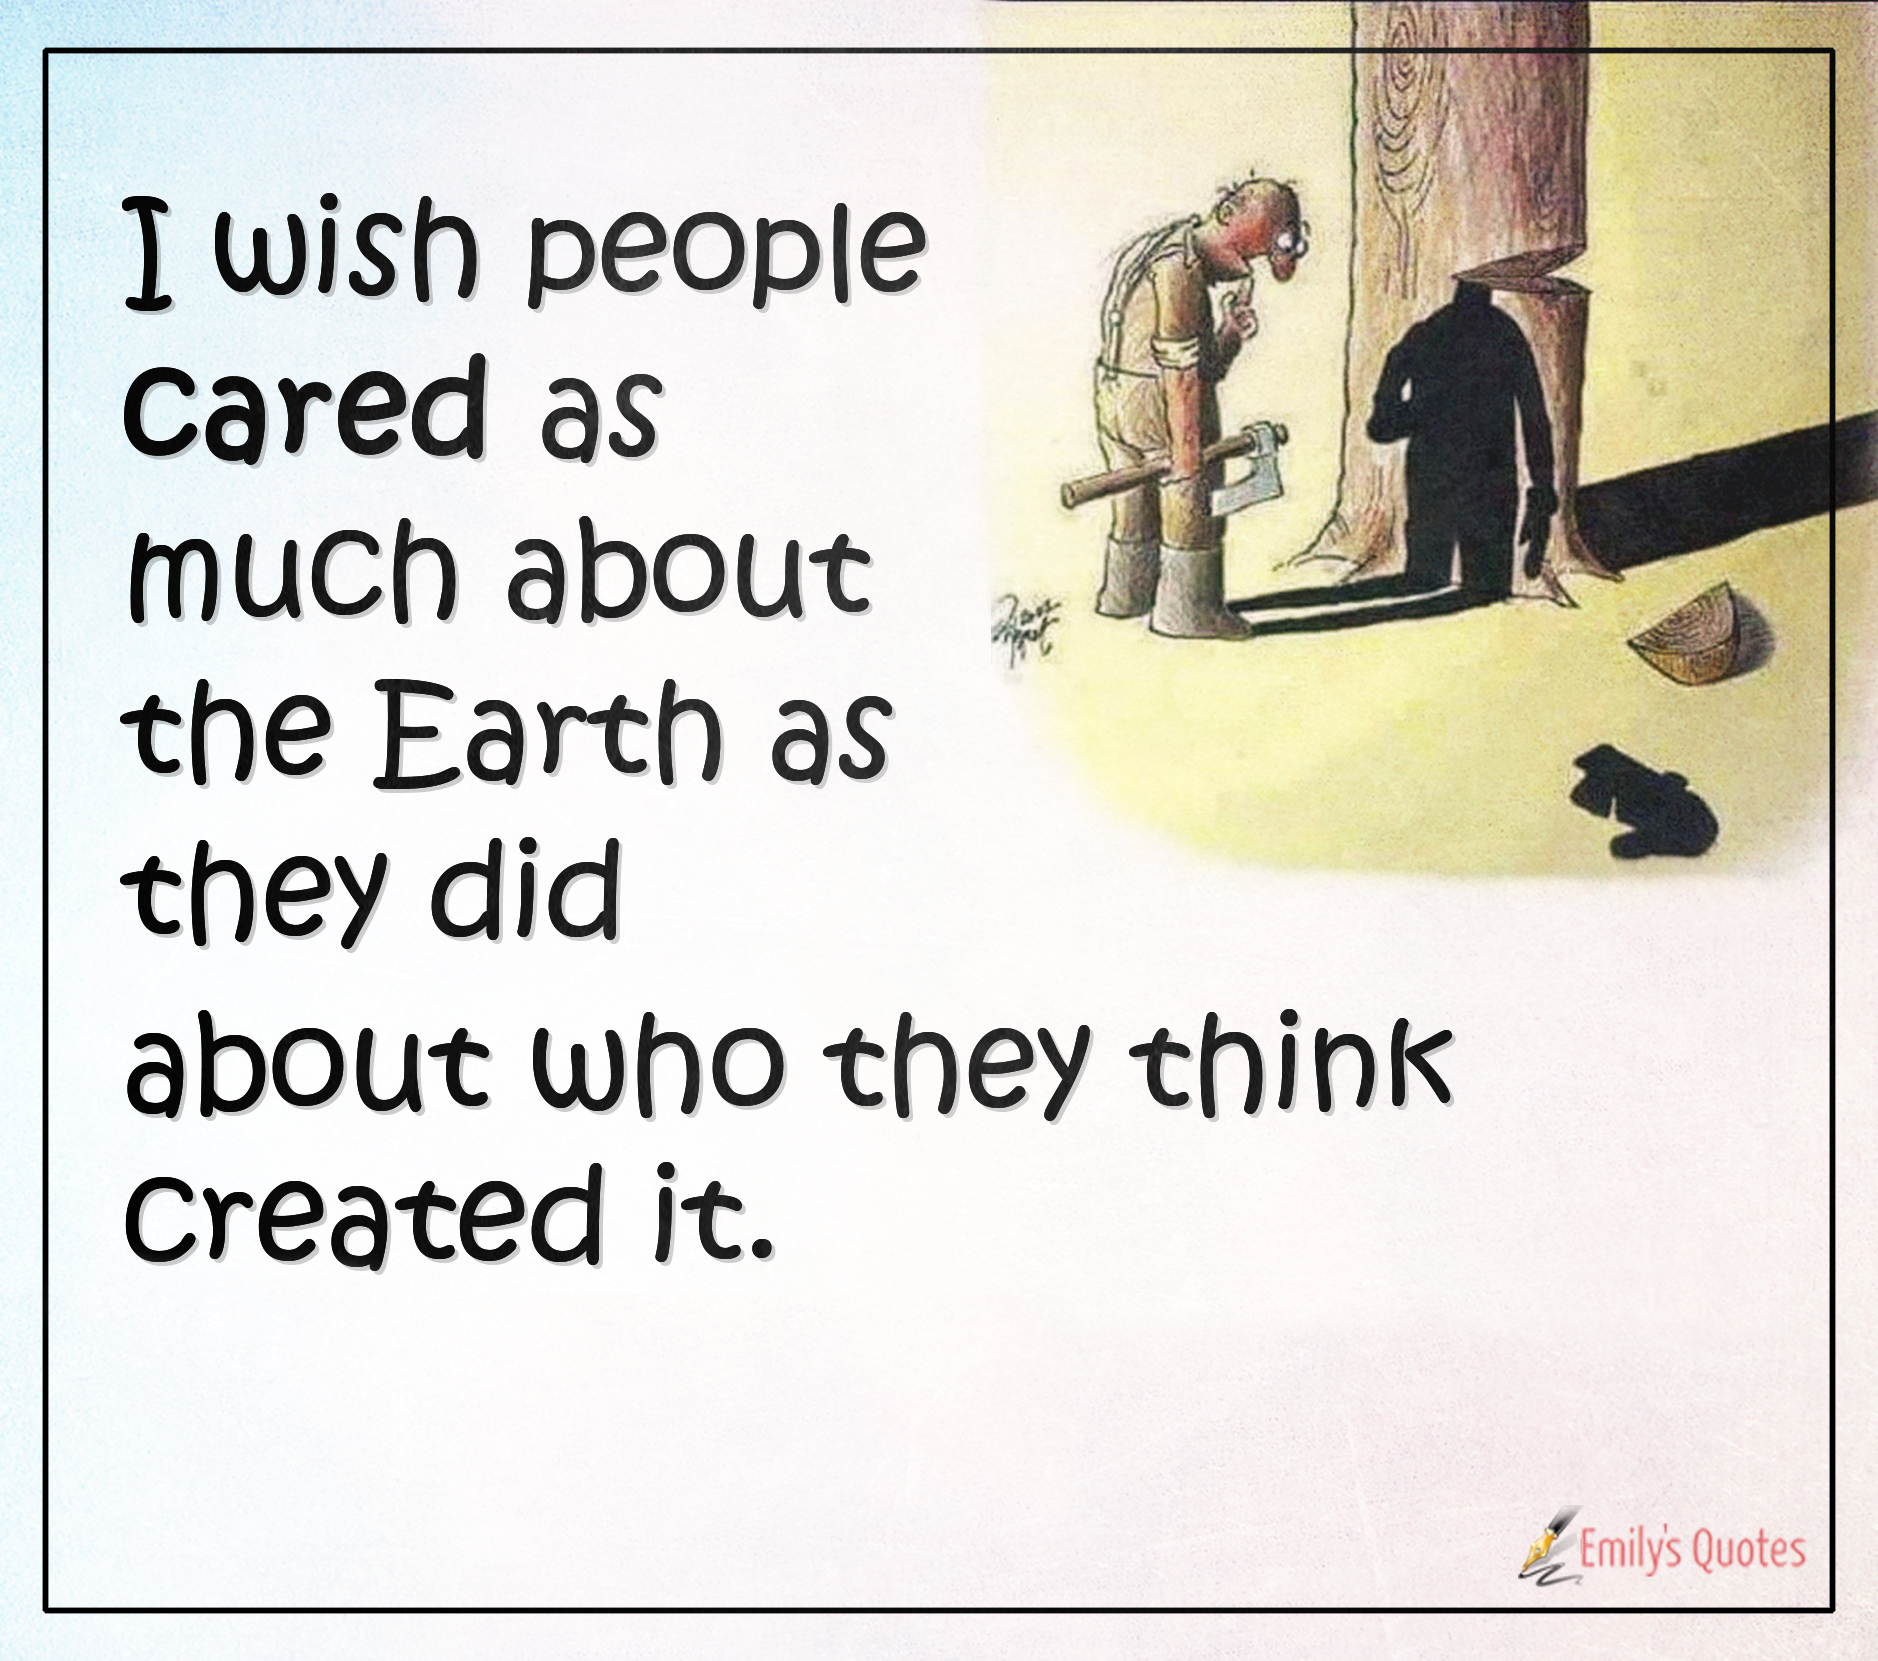 I wish people cared as much about the Earth as they did about